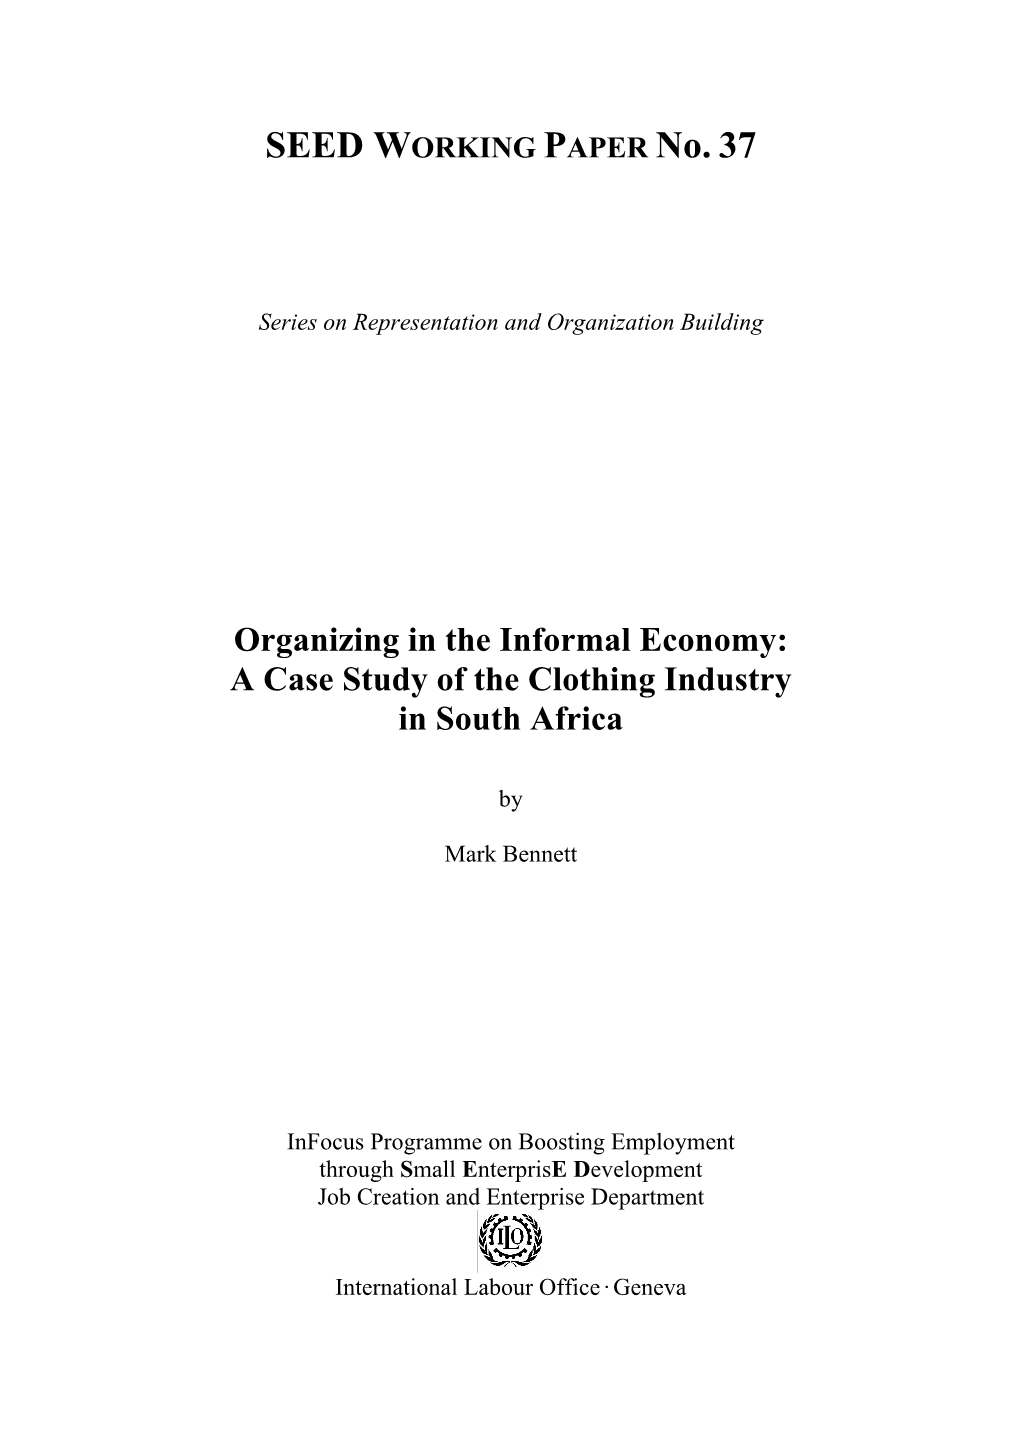 Organizing in the Informal Economy: a Case Study of the Clothing Industry in South Africa